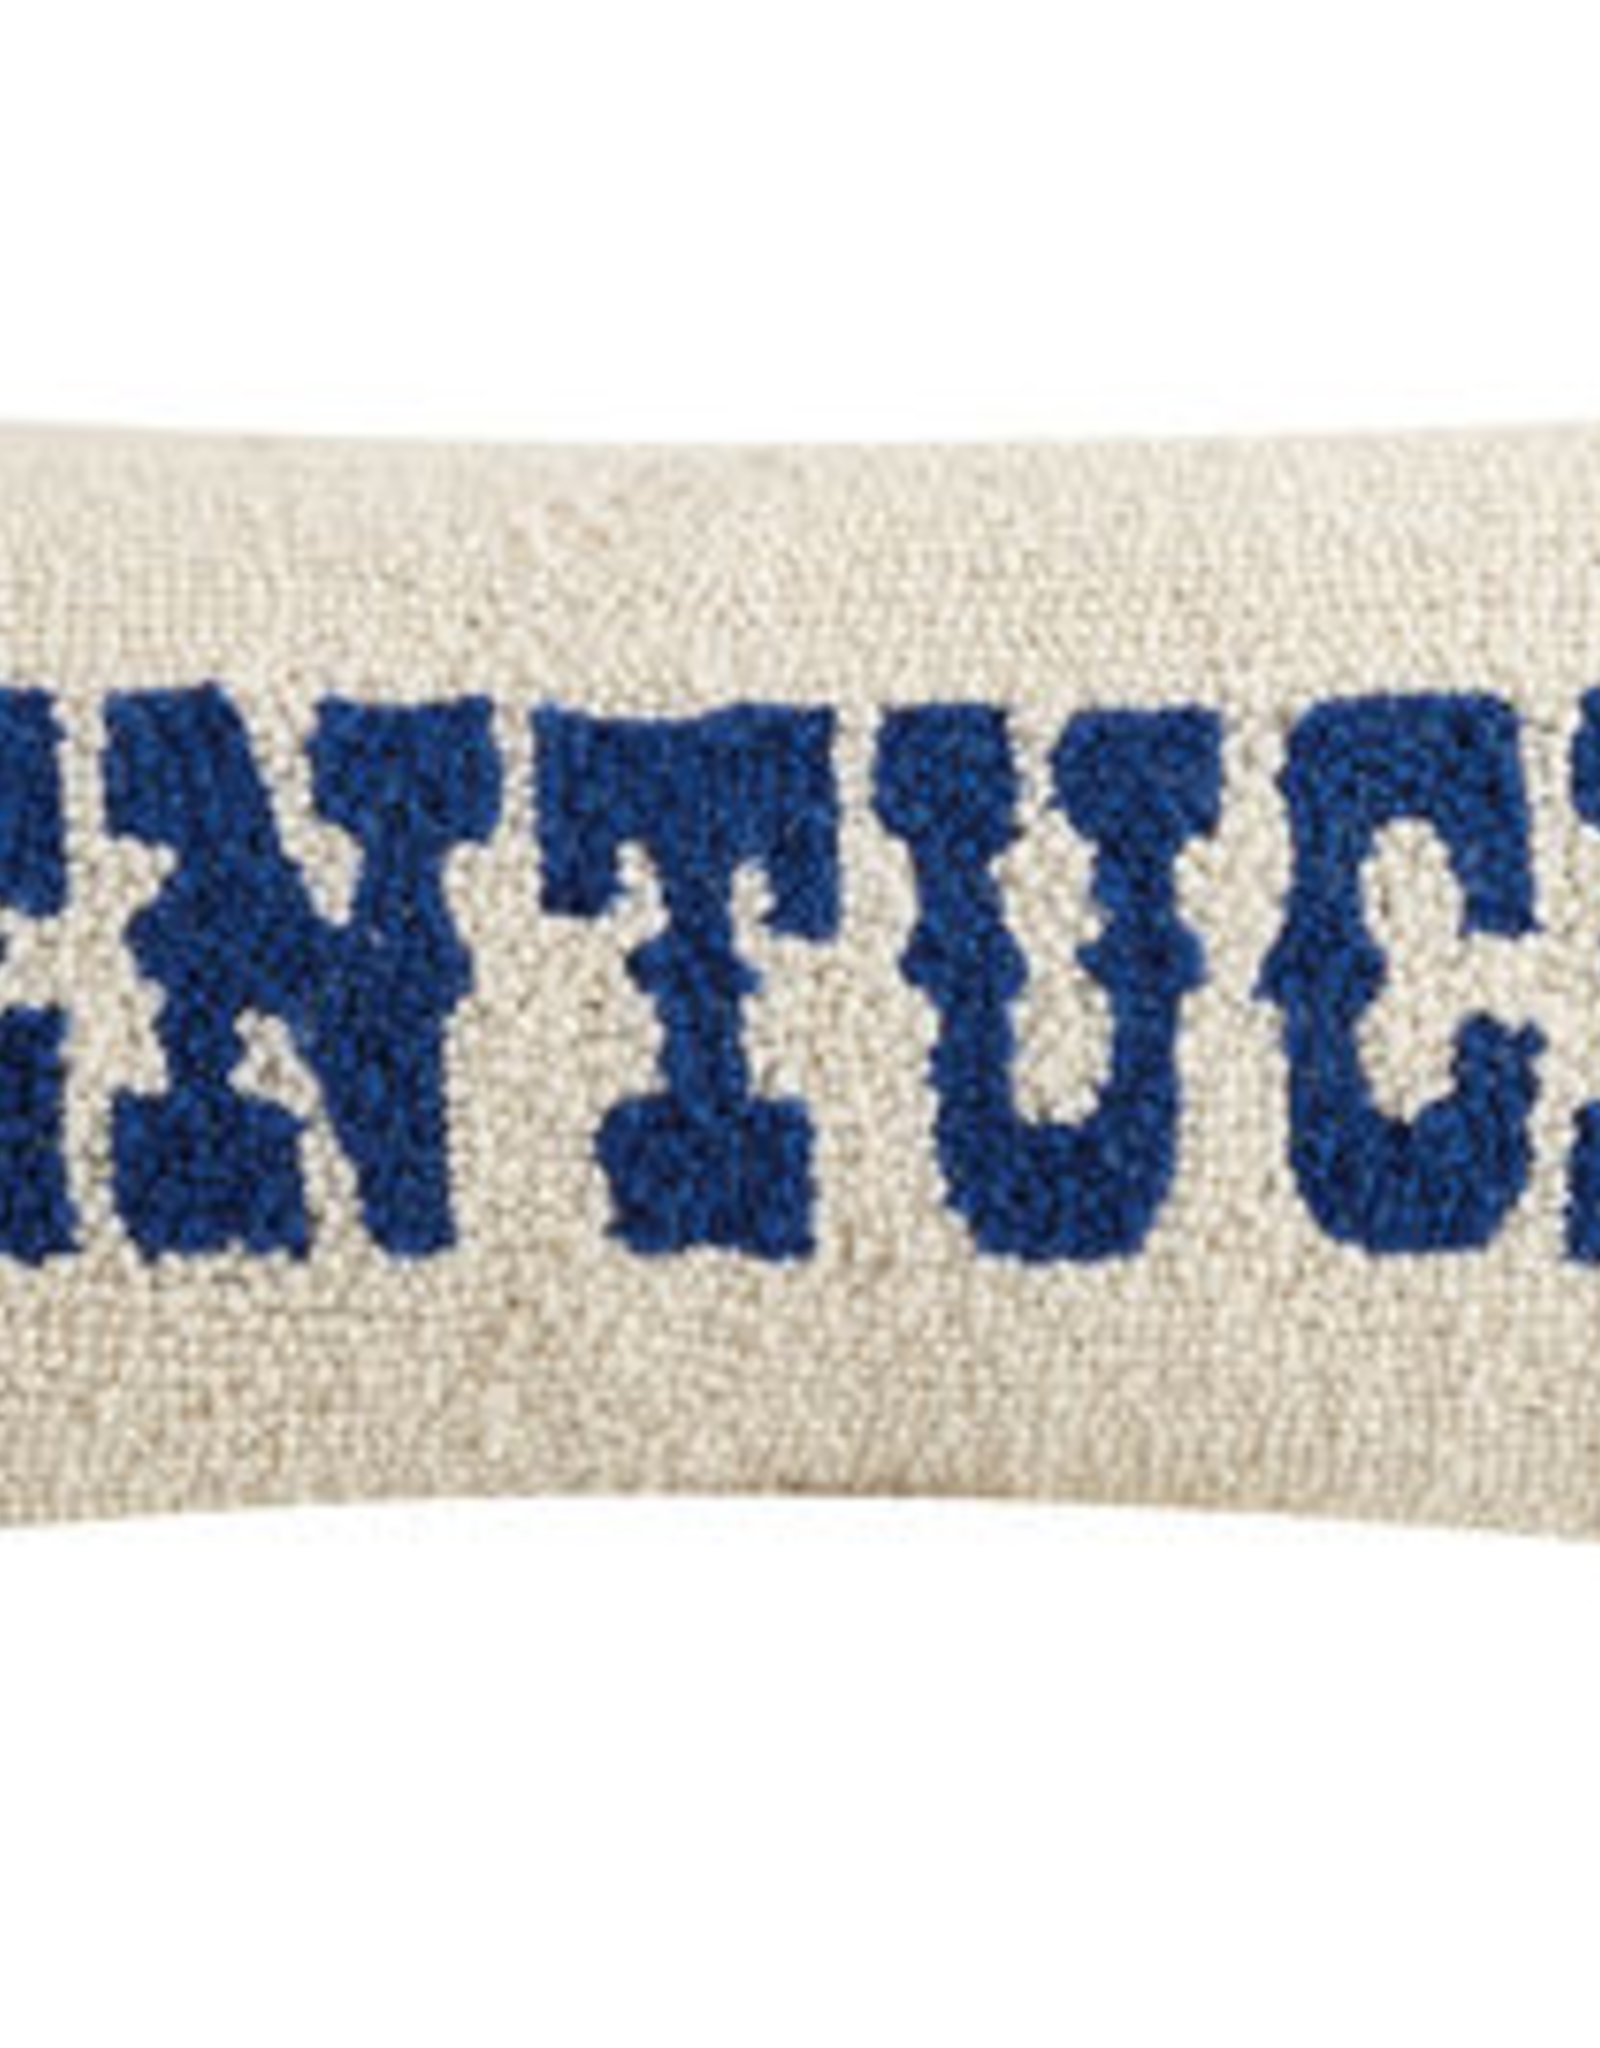 Beautiful Kentucky Hook Pillow - 8x 20. PERFECT FOR YOUR HOME